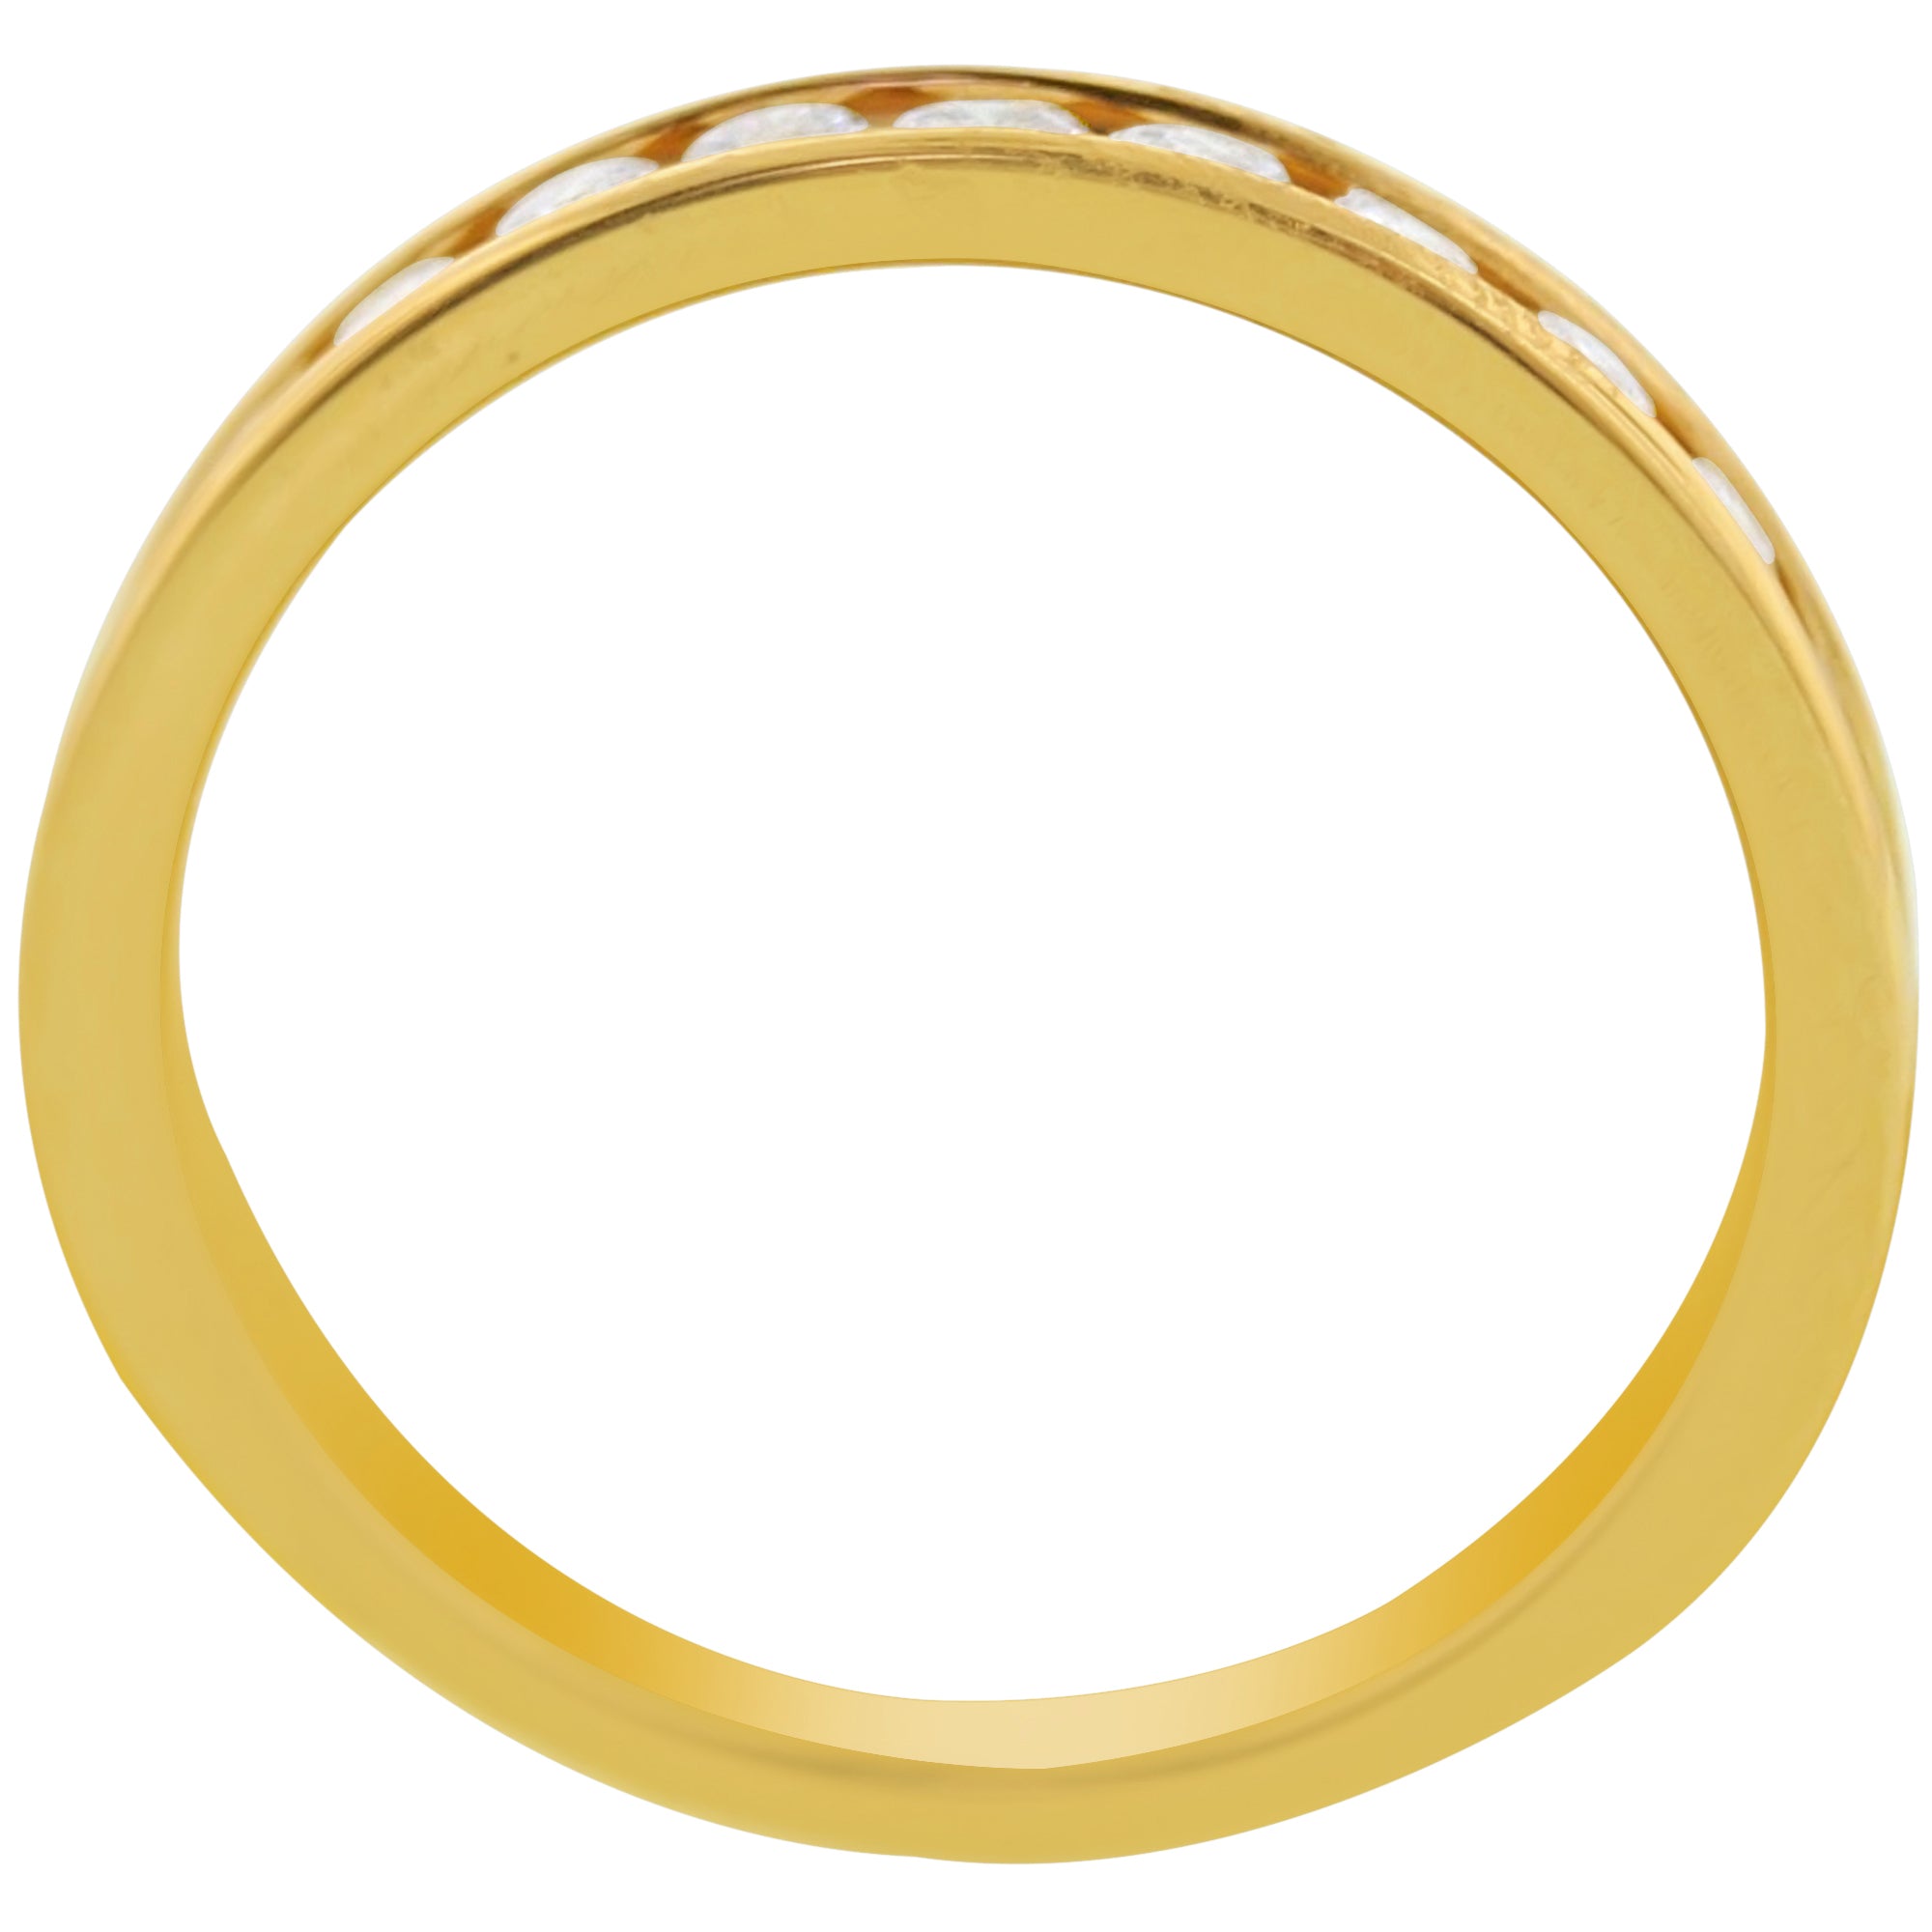 Northern Star Diamond Anniversary Band in 14kt Yellow Gold (1/2ct tw)